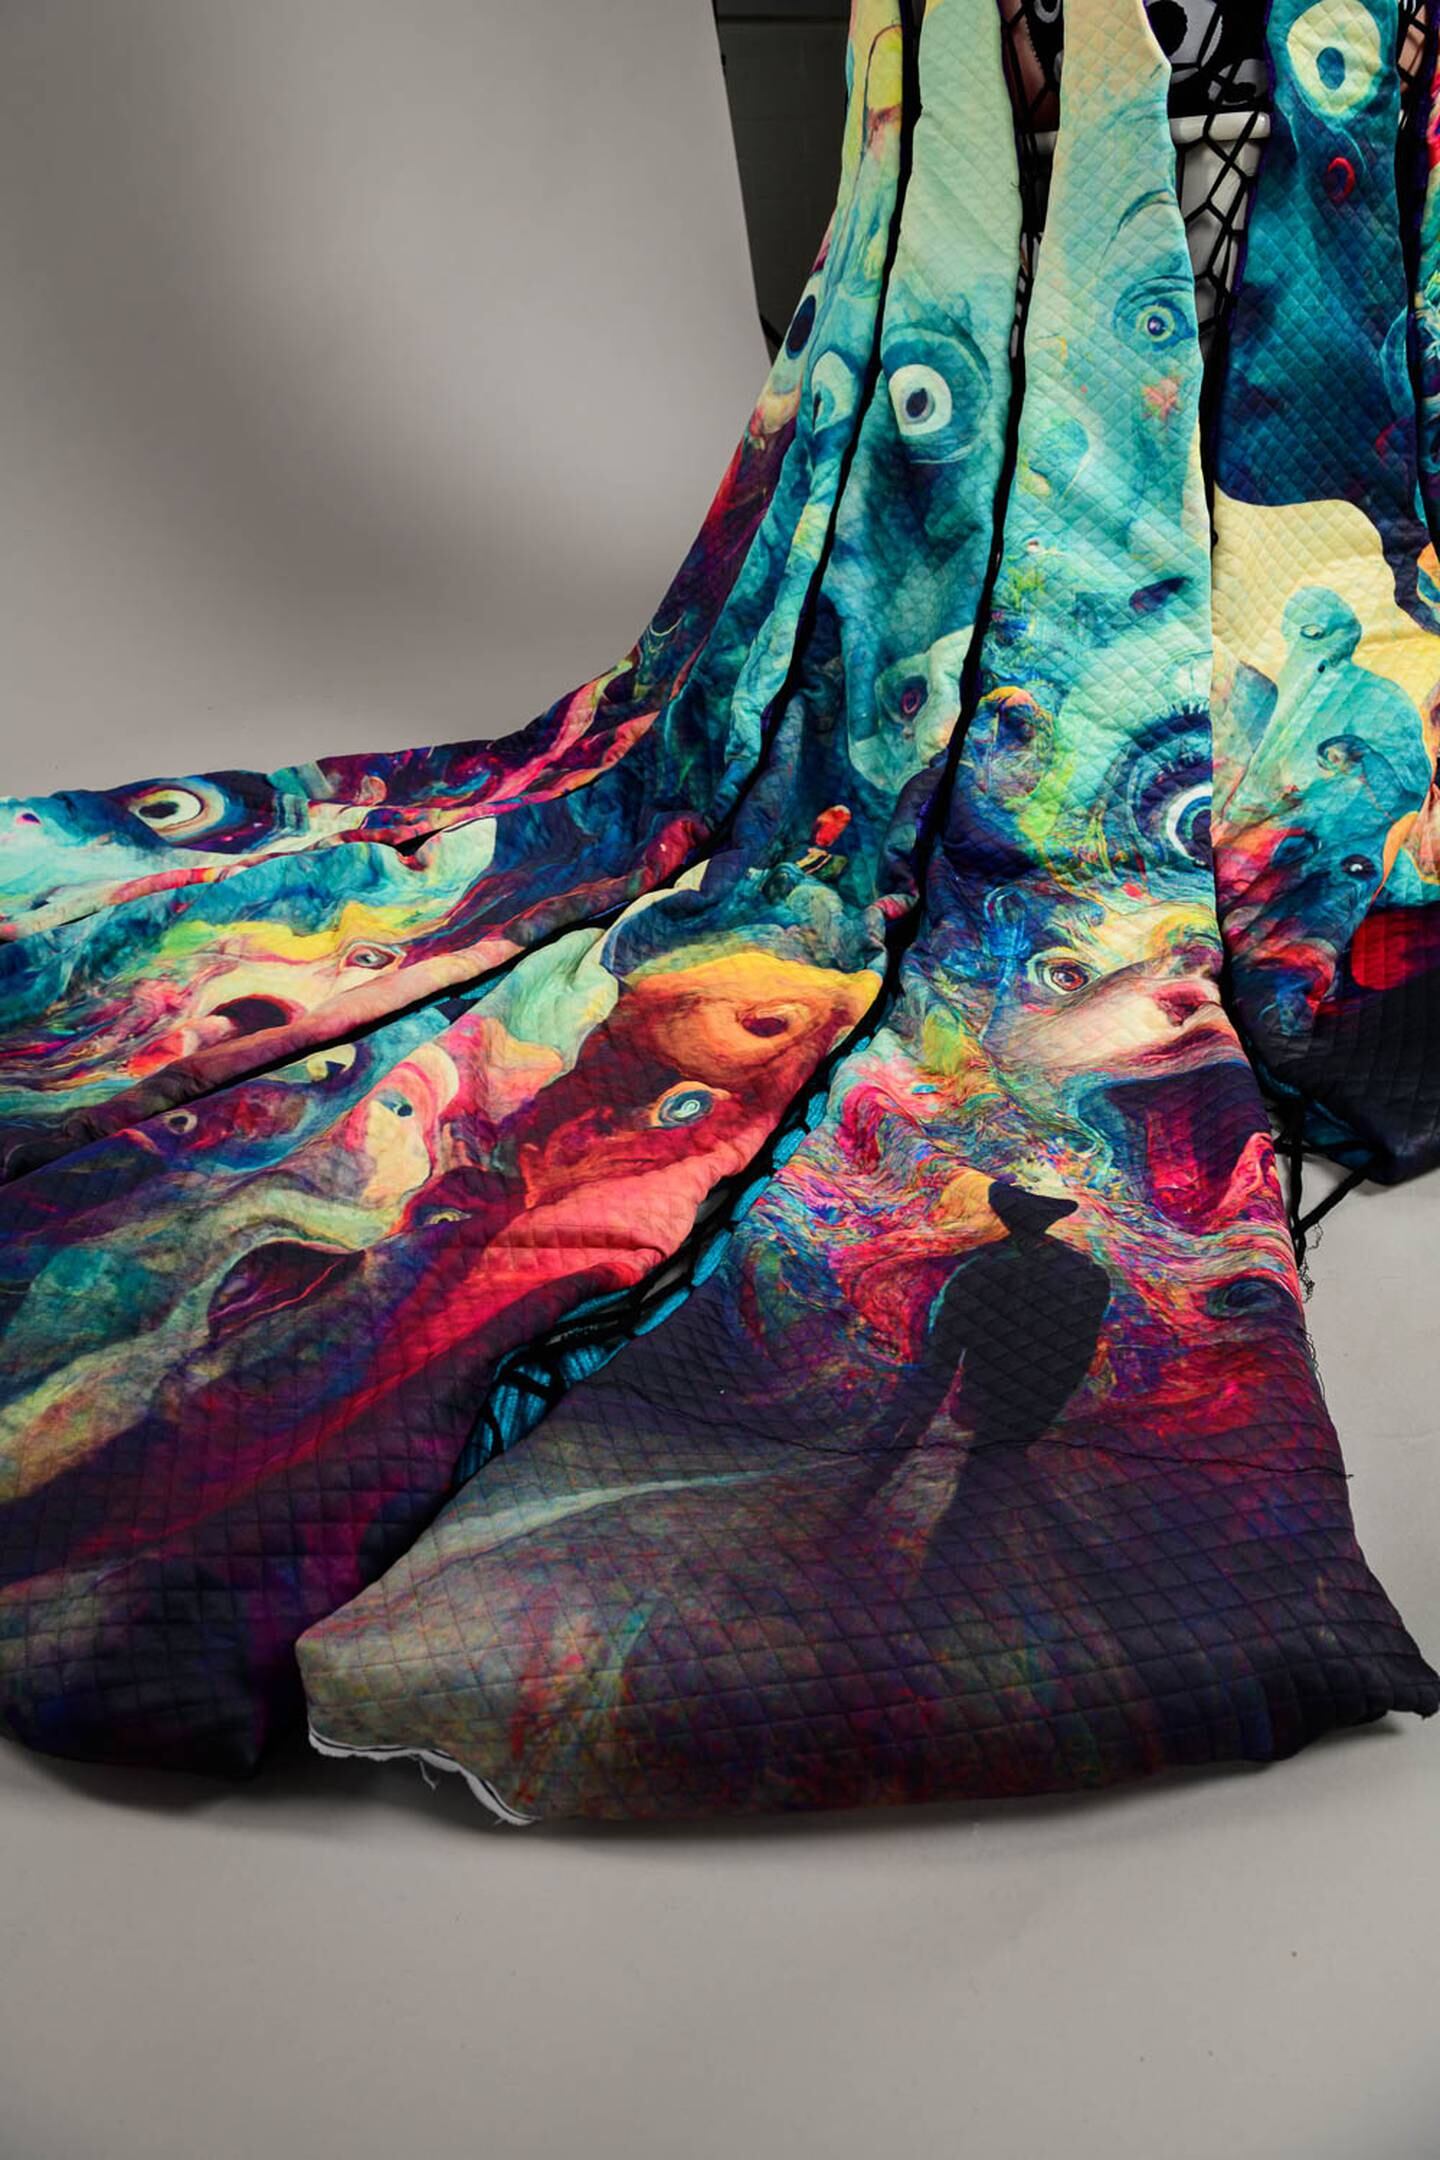 A colourful, psychedelic skirt with imagery such as eyes, the silhouette of a figure walking and animal-like creatures.